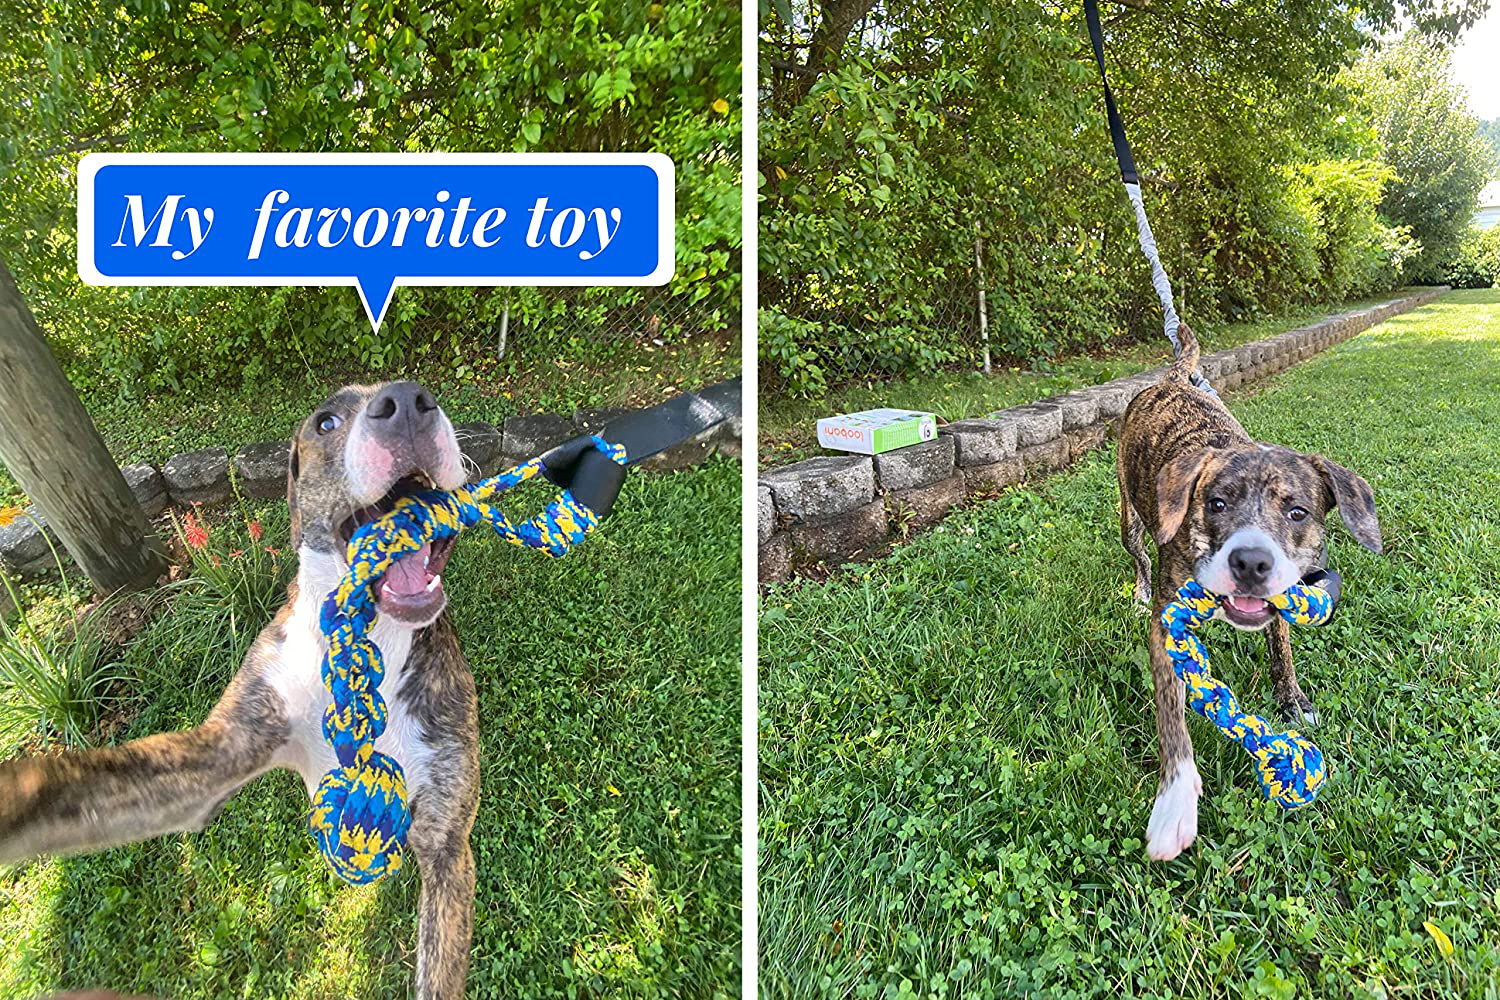 Outdoor Tether Tug Toy for Large Dogs